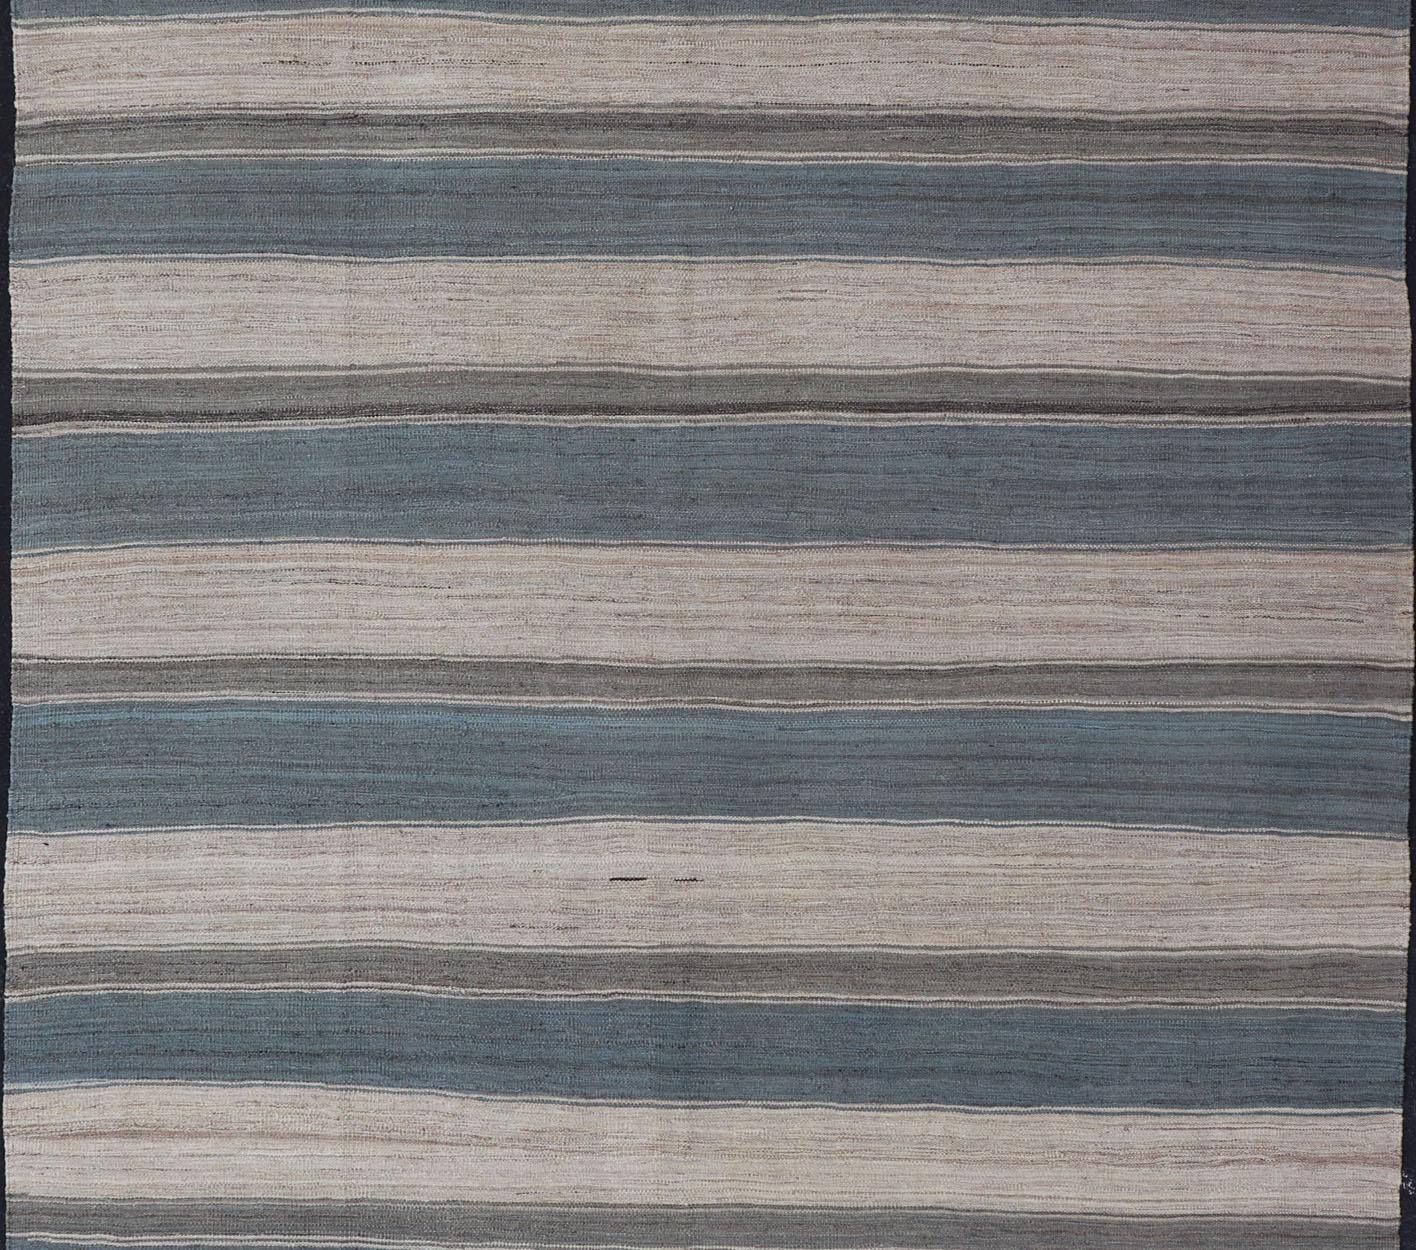 Afghan Flat-Weave Modern Kilim Rug with Stripes in Shades of Blue, Charcoal and Ivory For Sale